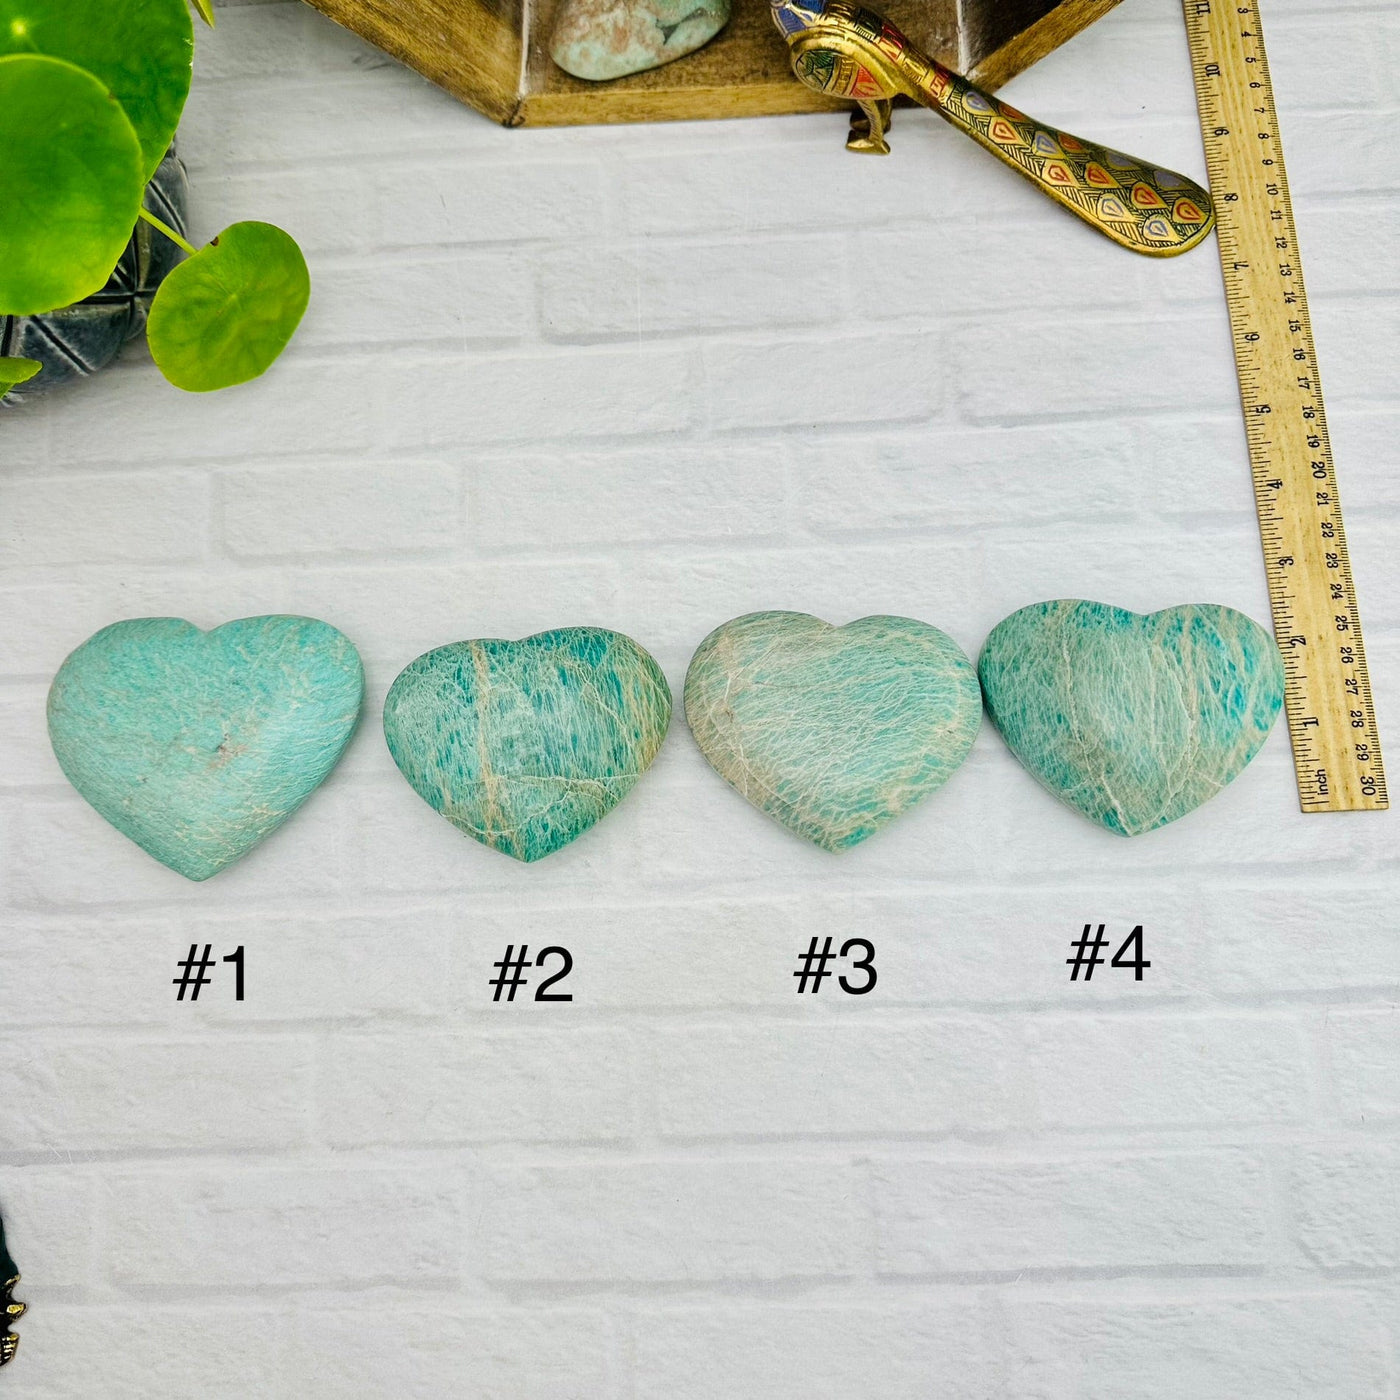 Polished Amazonite Heart - YOU CHOOSE - all four choices next to a ruler for size refence 